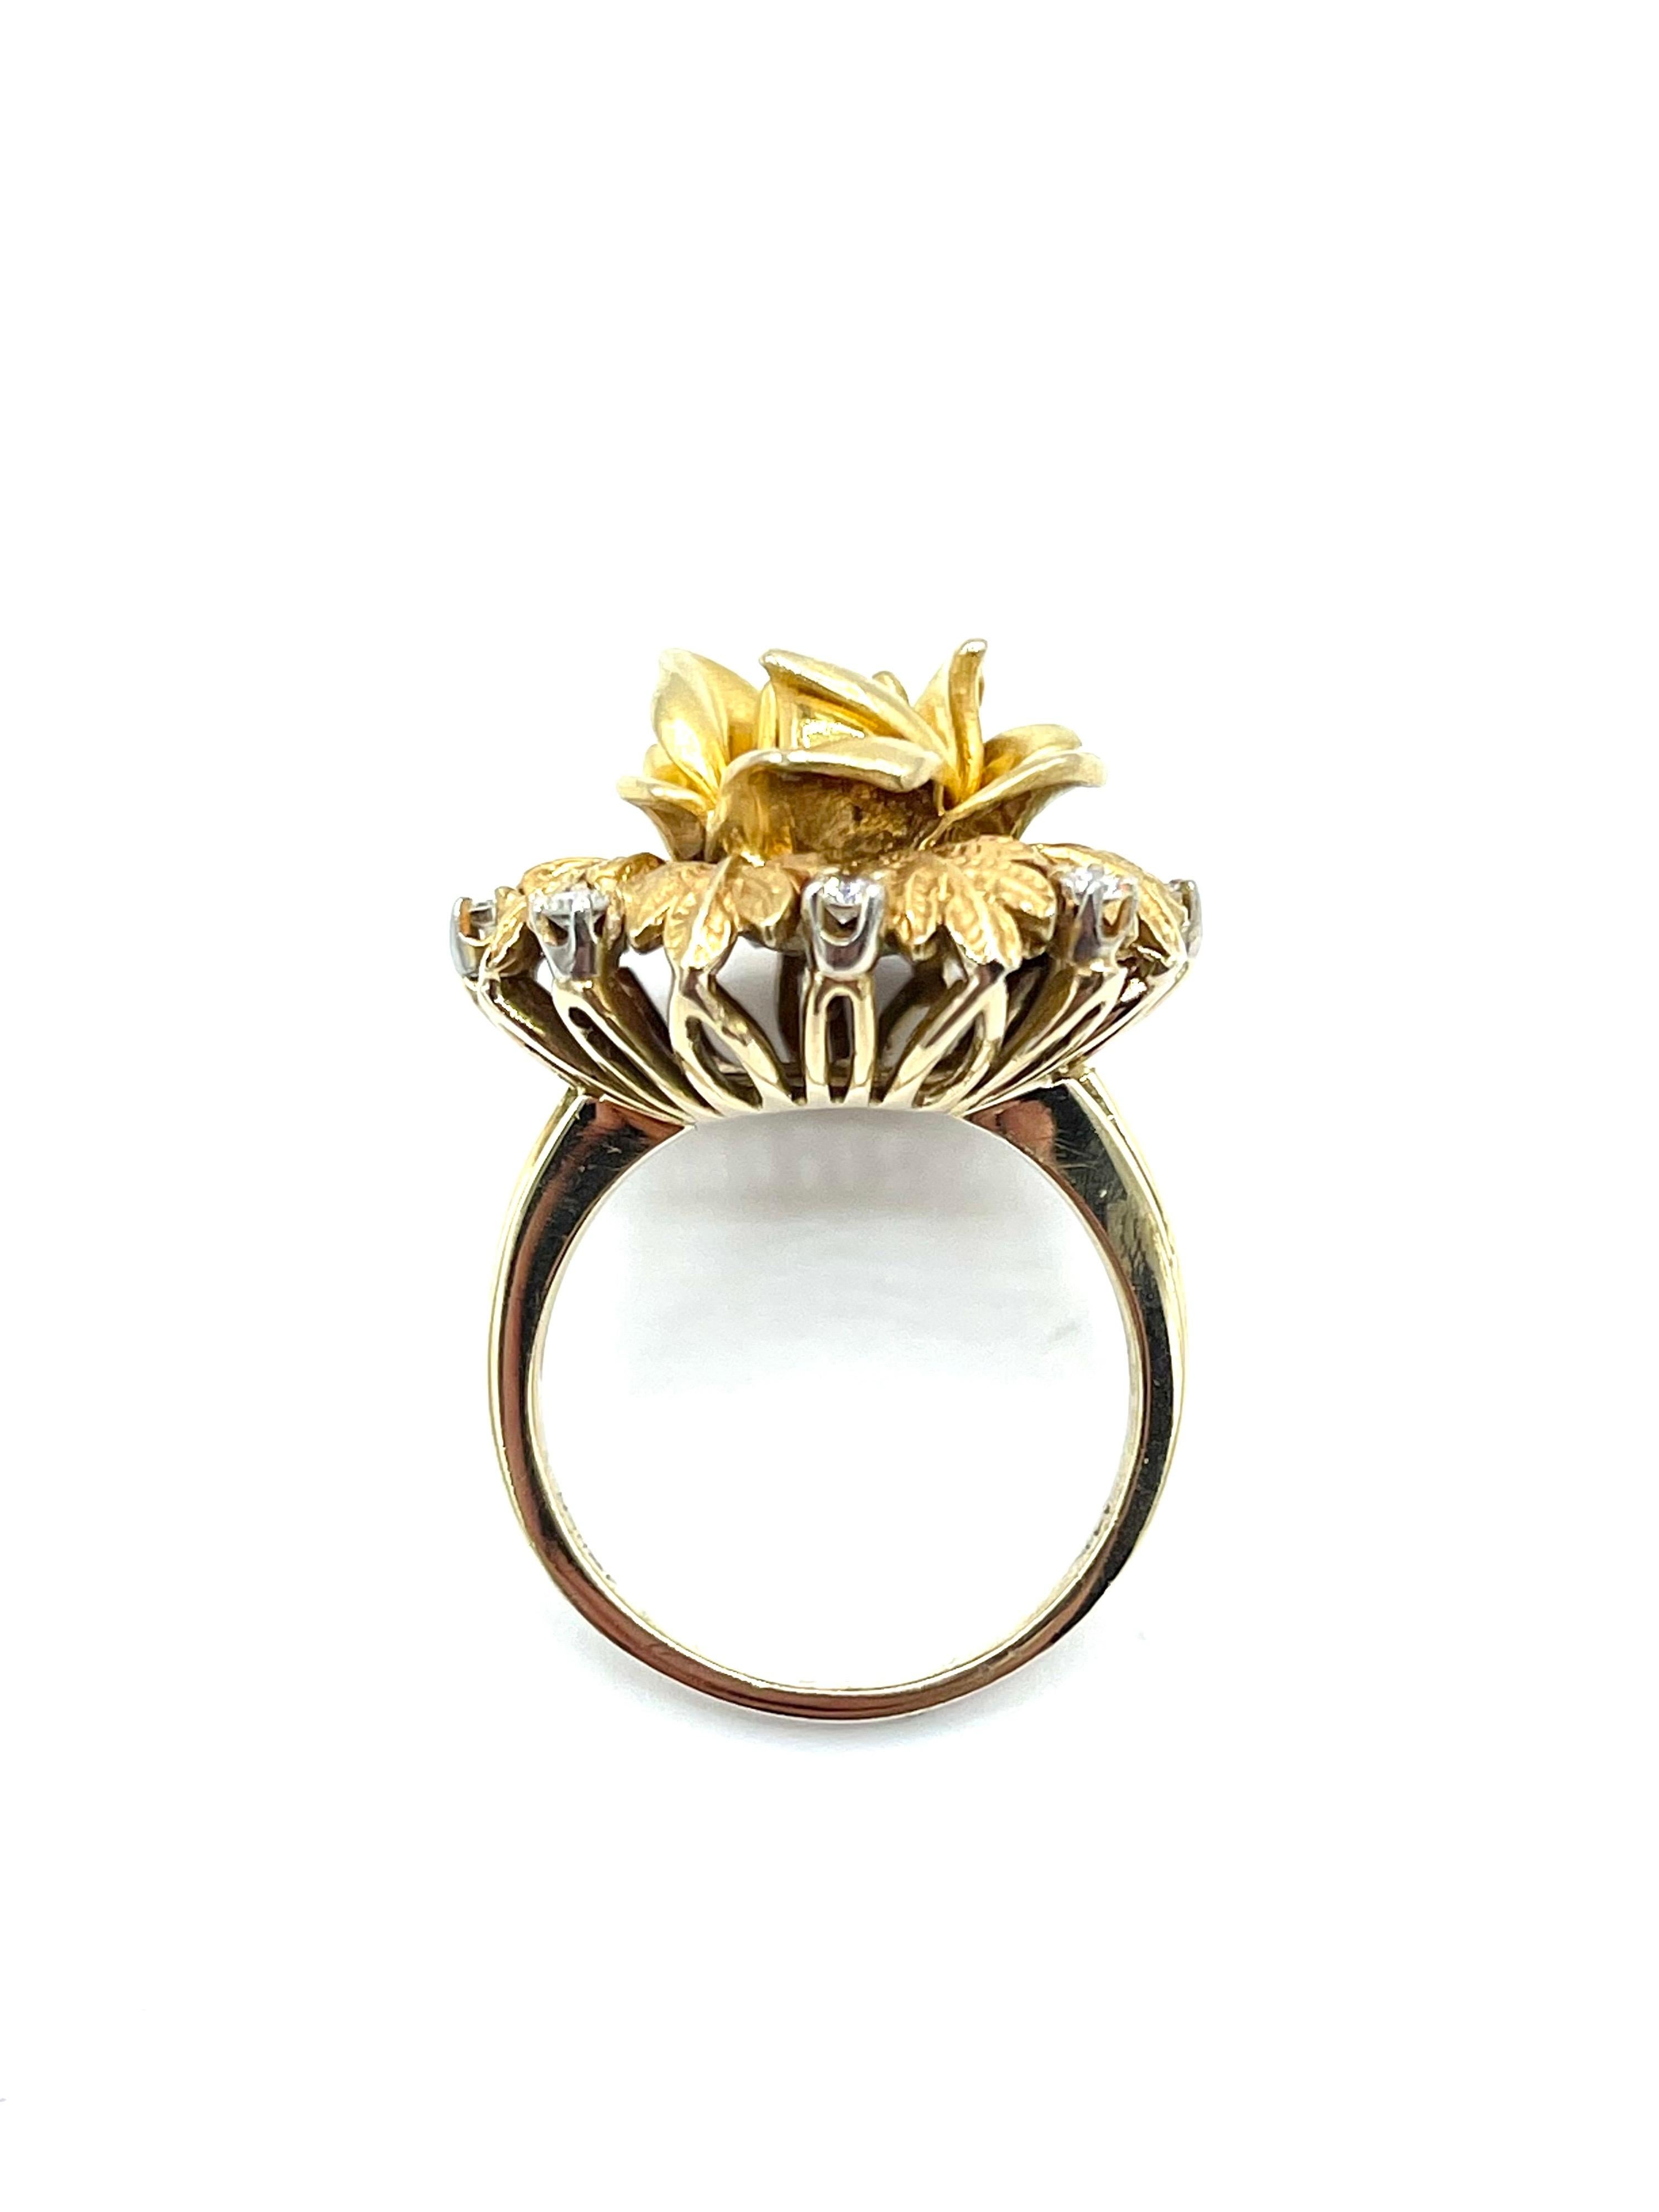 0.36 Carat Round Brilliant Diamond and Textured 18K Gold Flower Cocktail Ring For Sale 1